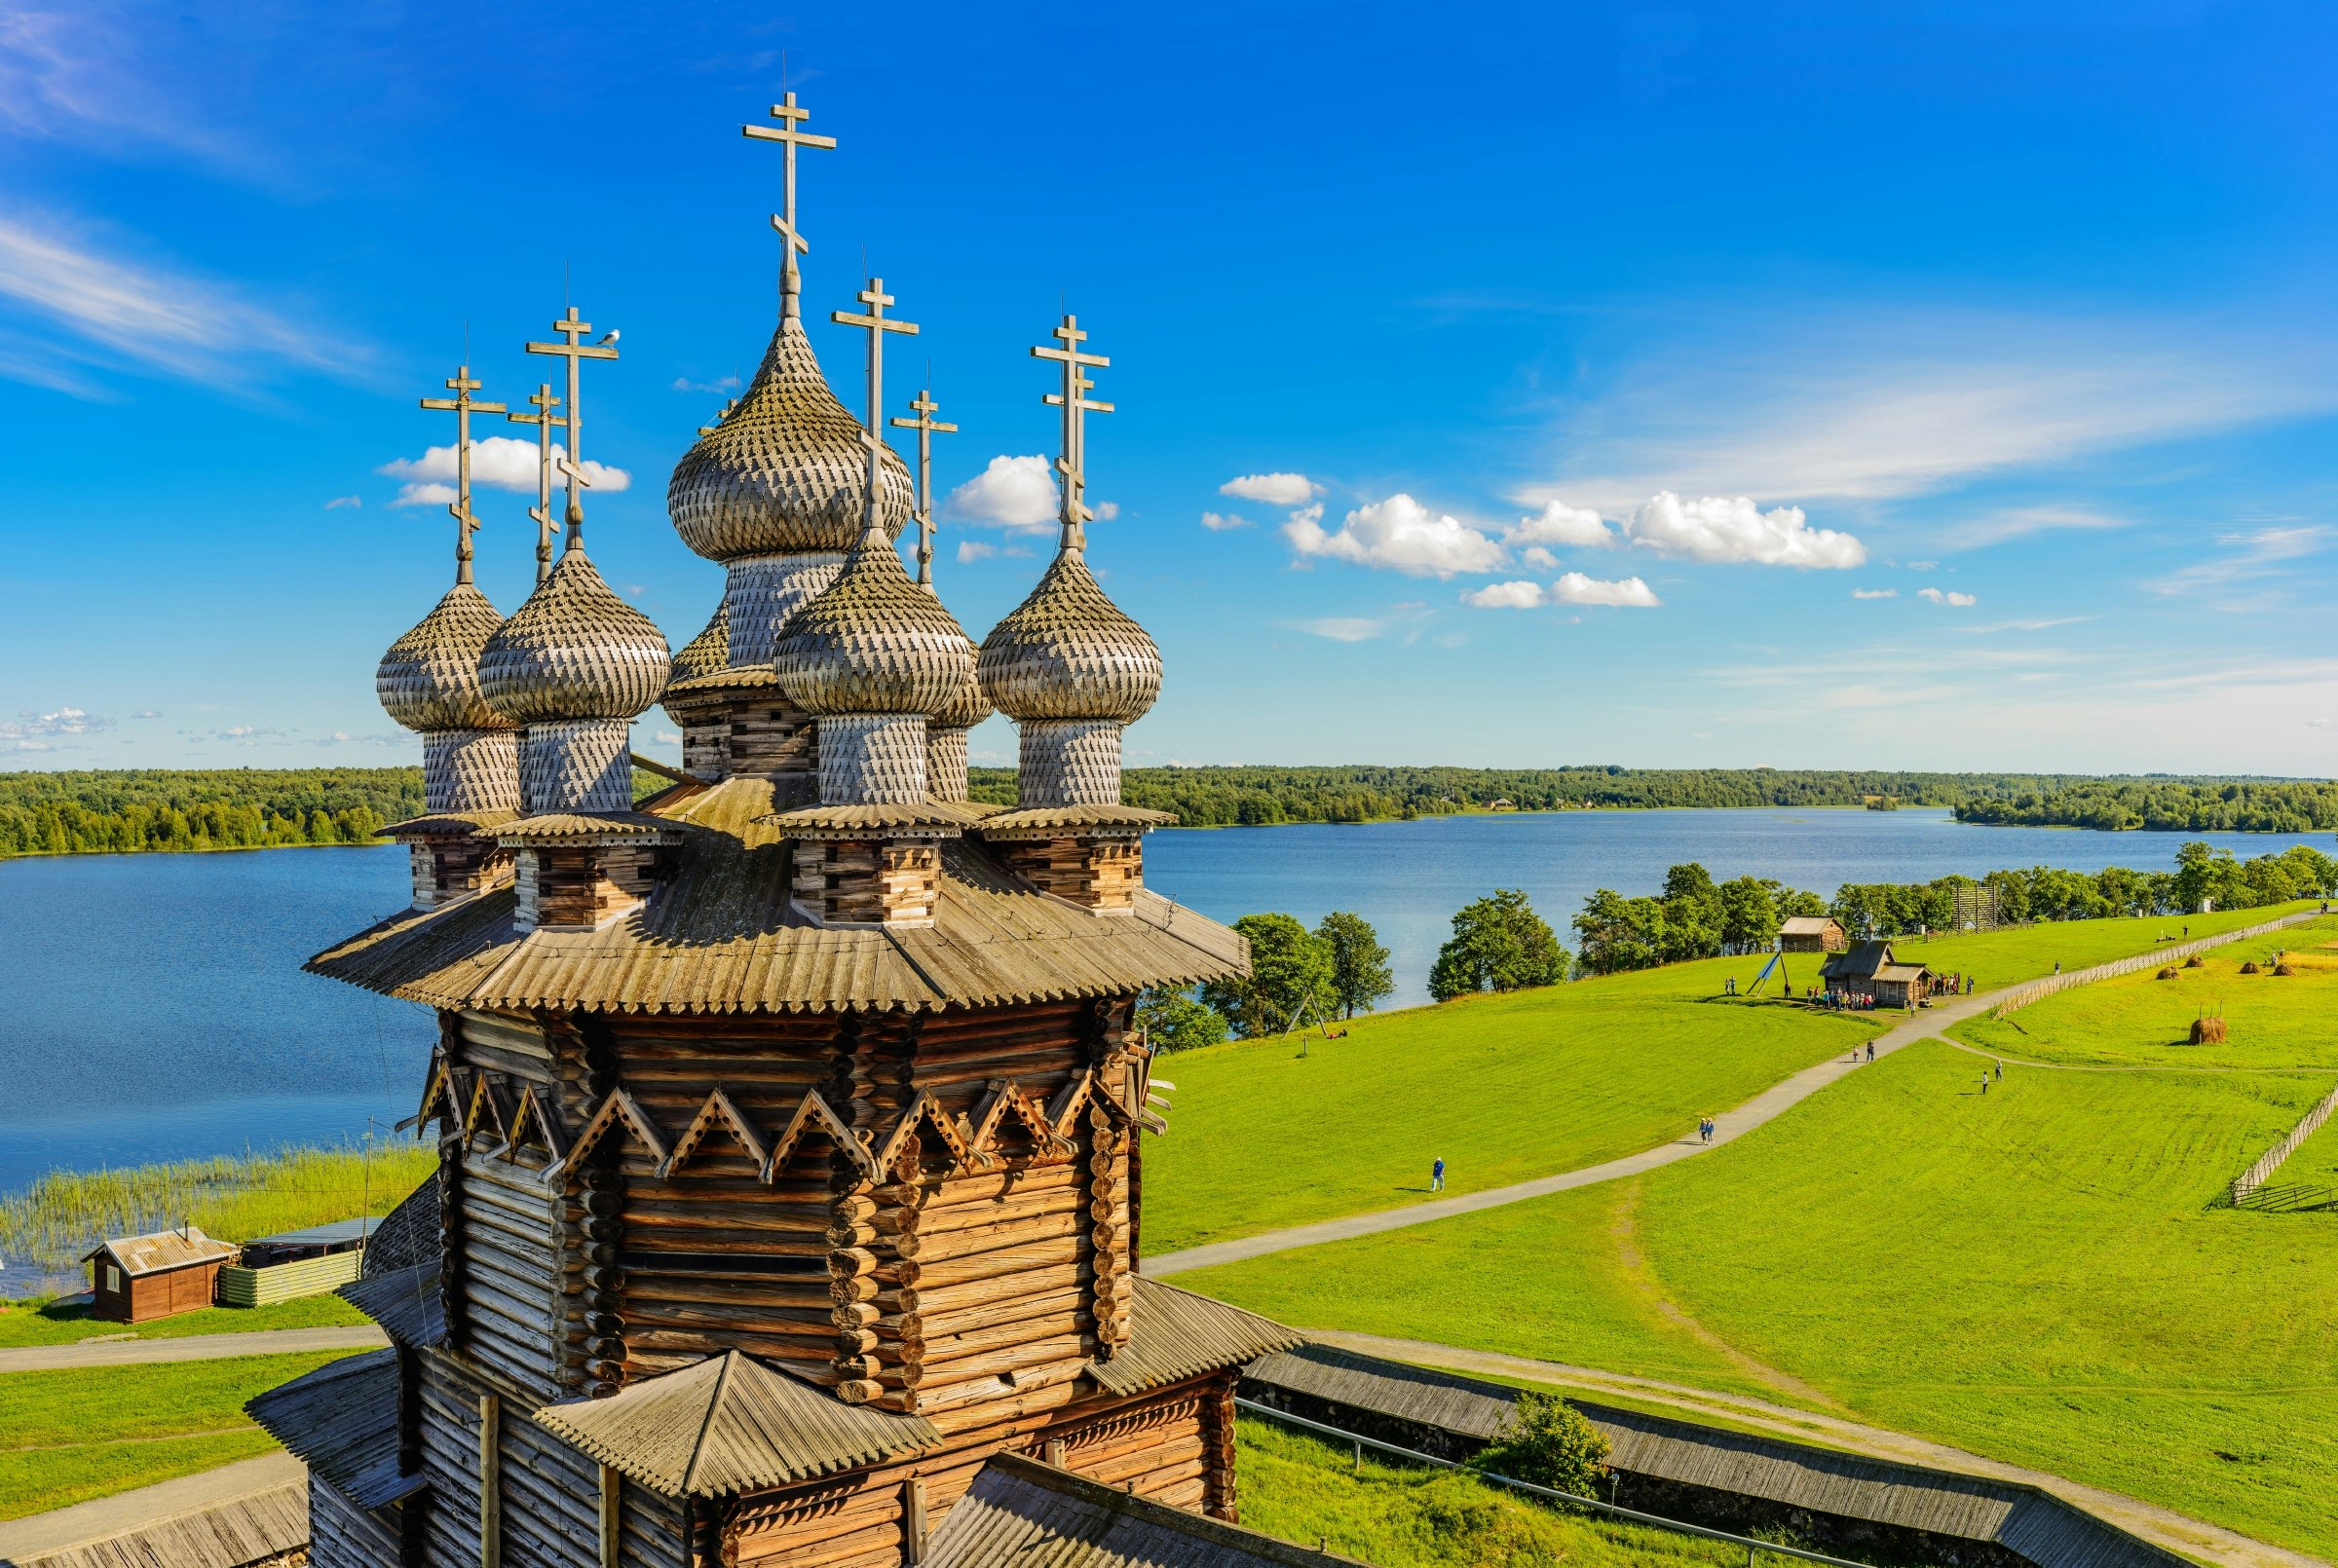 A multi-domed wooden tower, with each dome topped with a cross, set within a grassy field on the edge of a lake